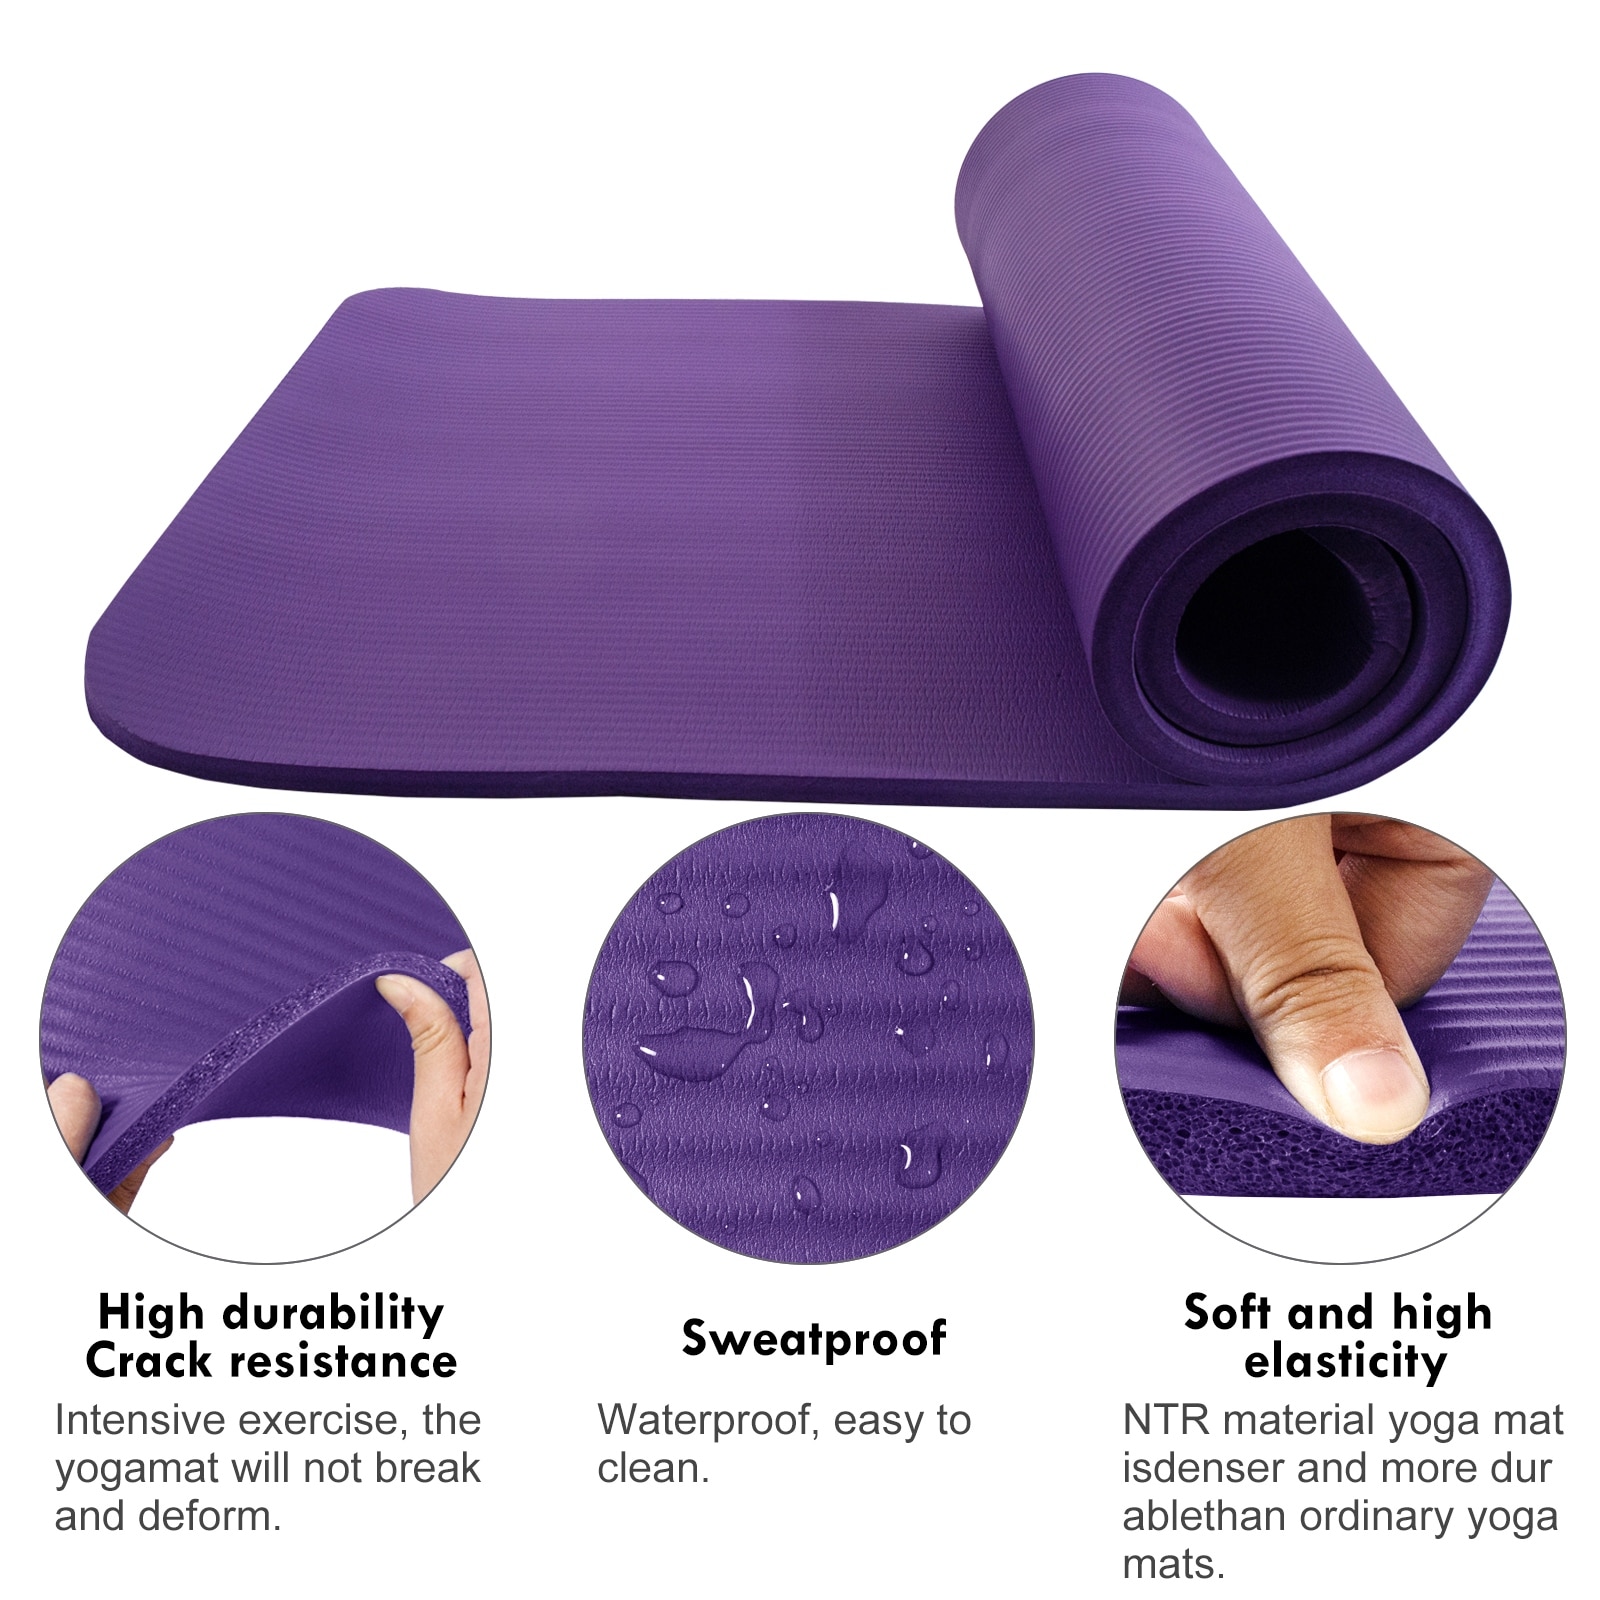 Pro Space Pink High Density Large Yoga Mat 79 in. L x 52 in. W x